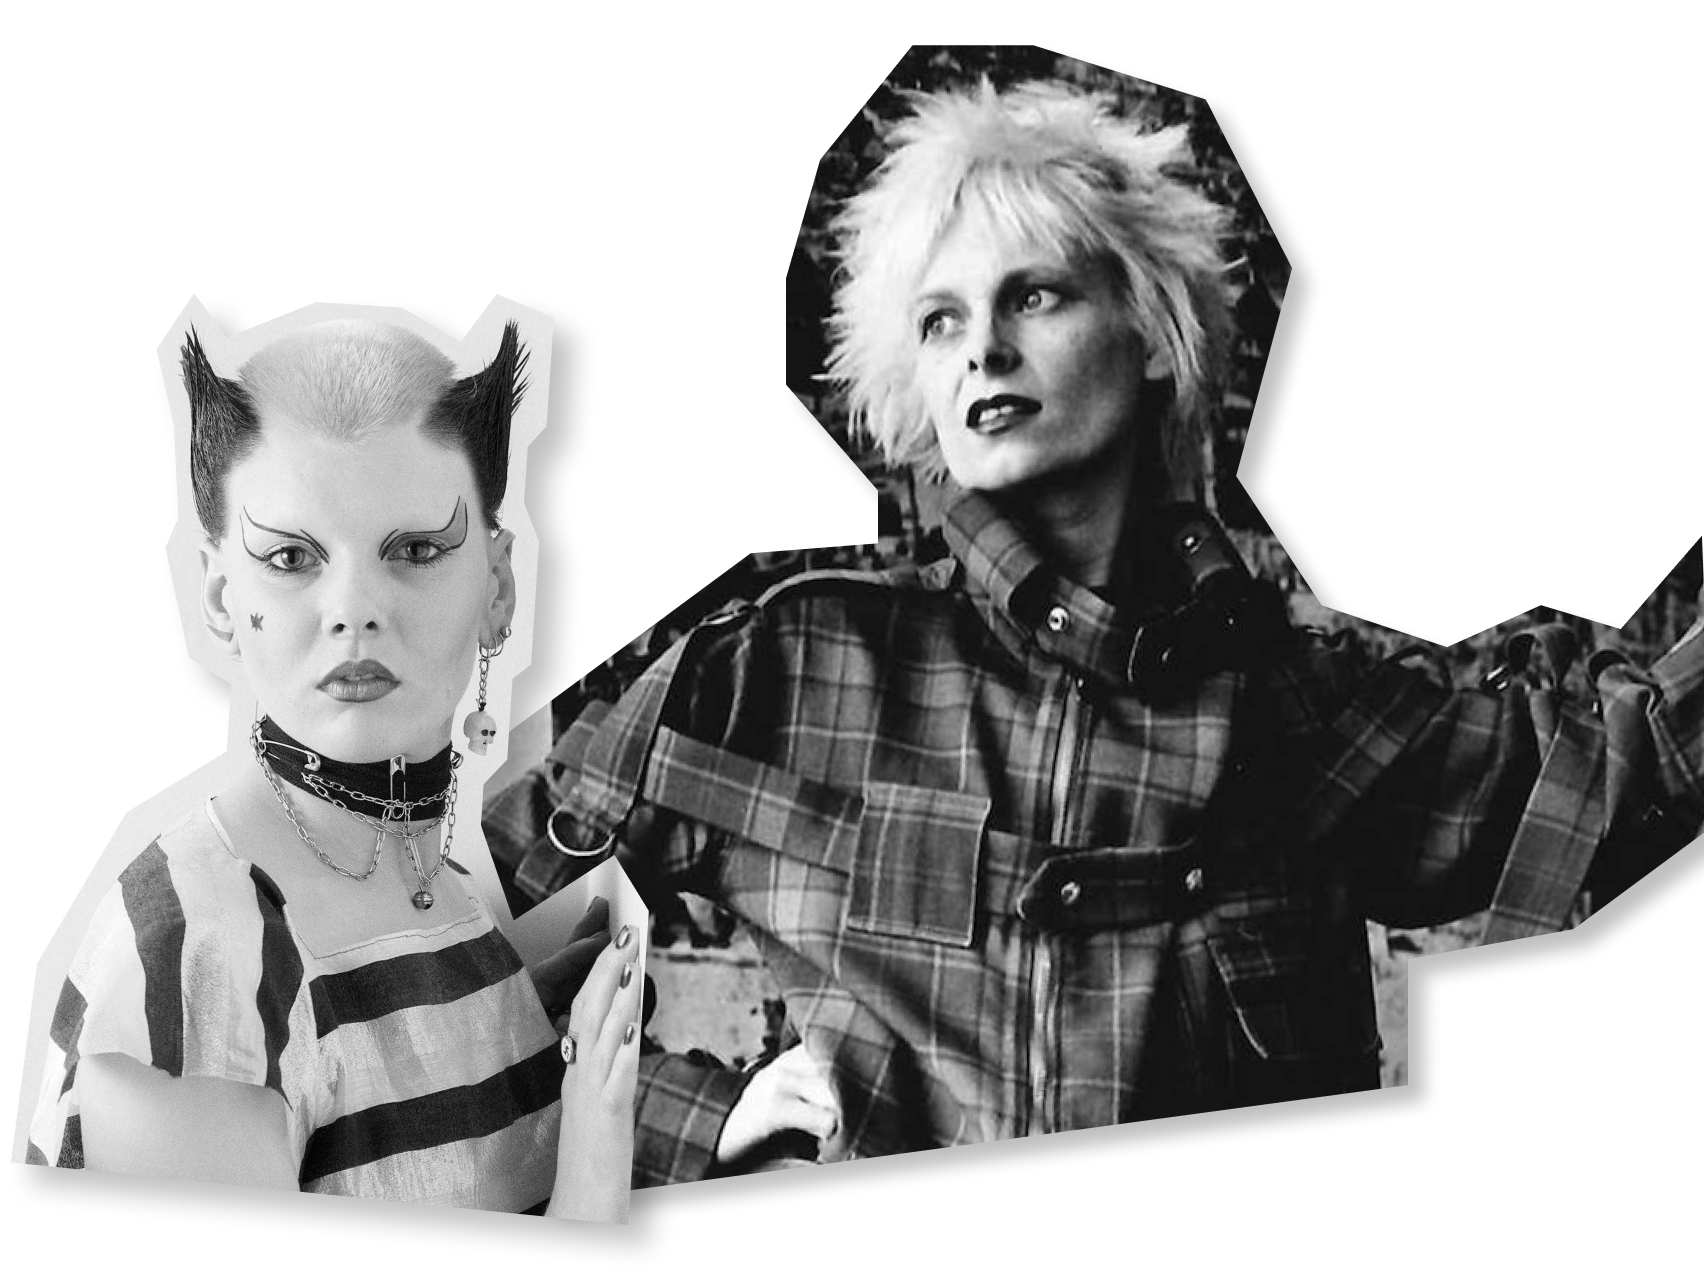 Two images of Vivienne Westwood featuring her controversial and new 1970s punk fashion sense.